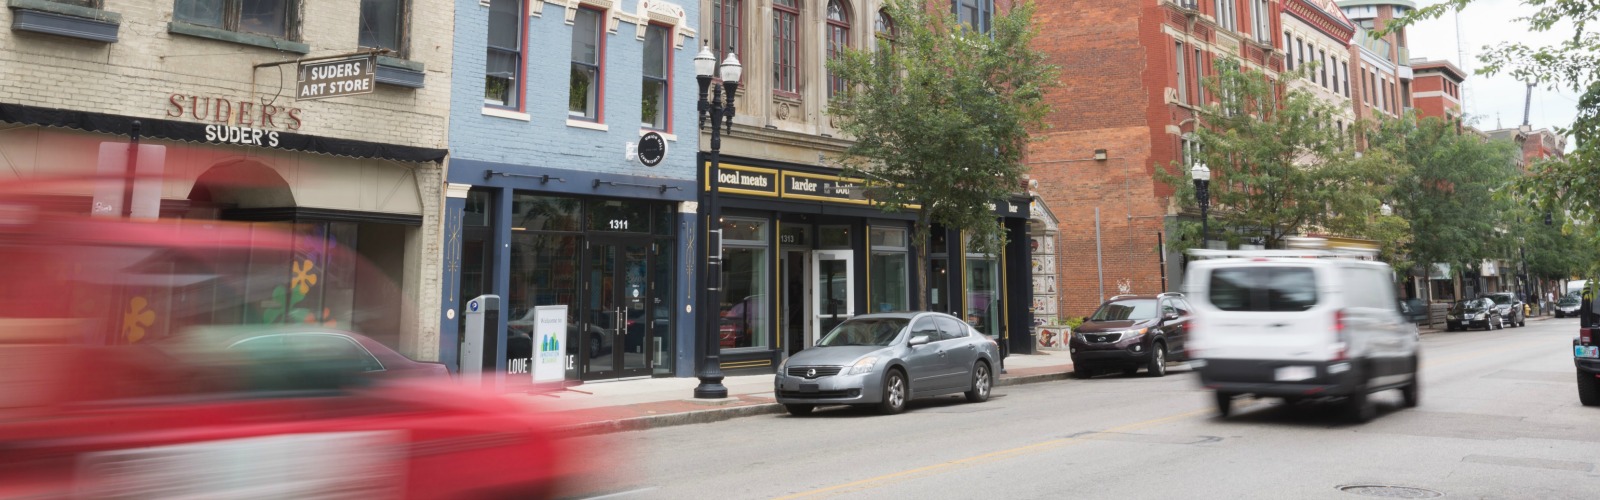 Cintrifuse, an Over-the-Rhine based startup engine, is located in Union Hall.